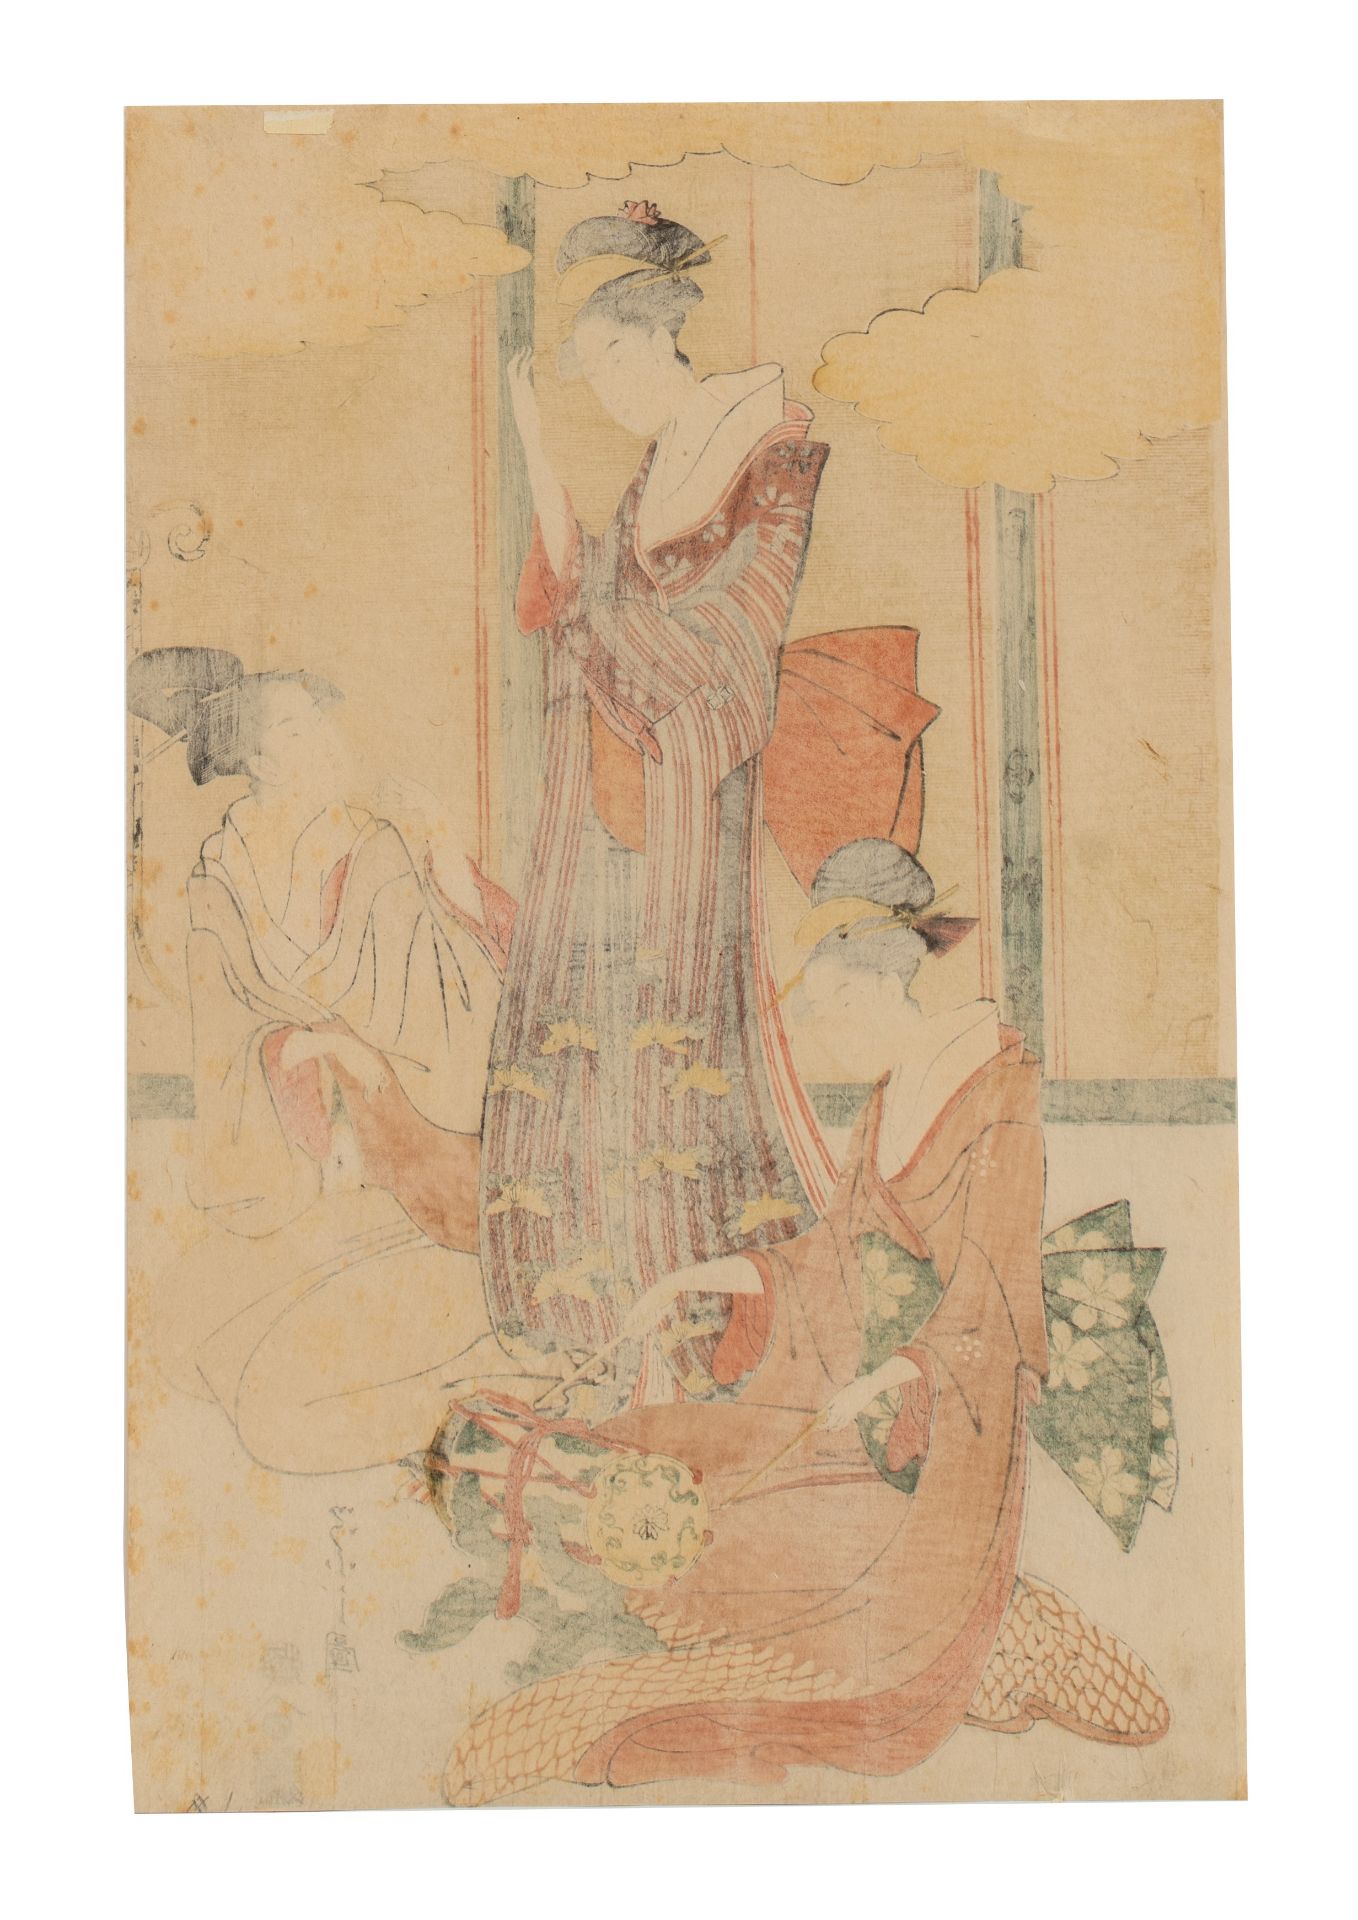 A Japanese woodblock print by Eishi, from the series on musical accomplishments, three courtesans on - Image 2 of 4